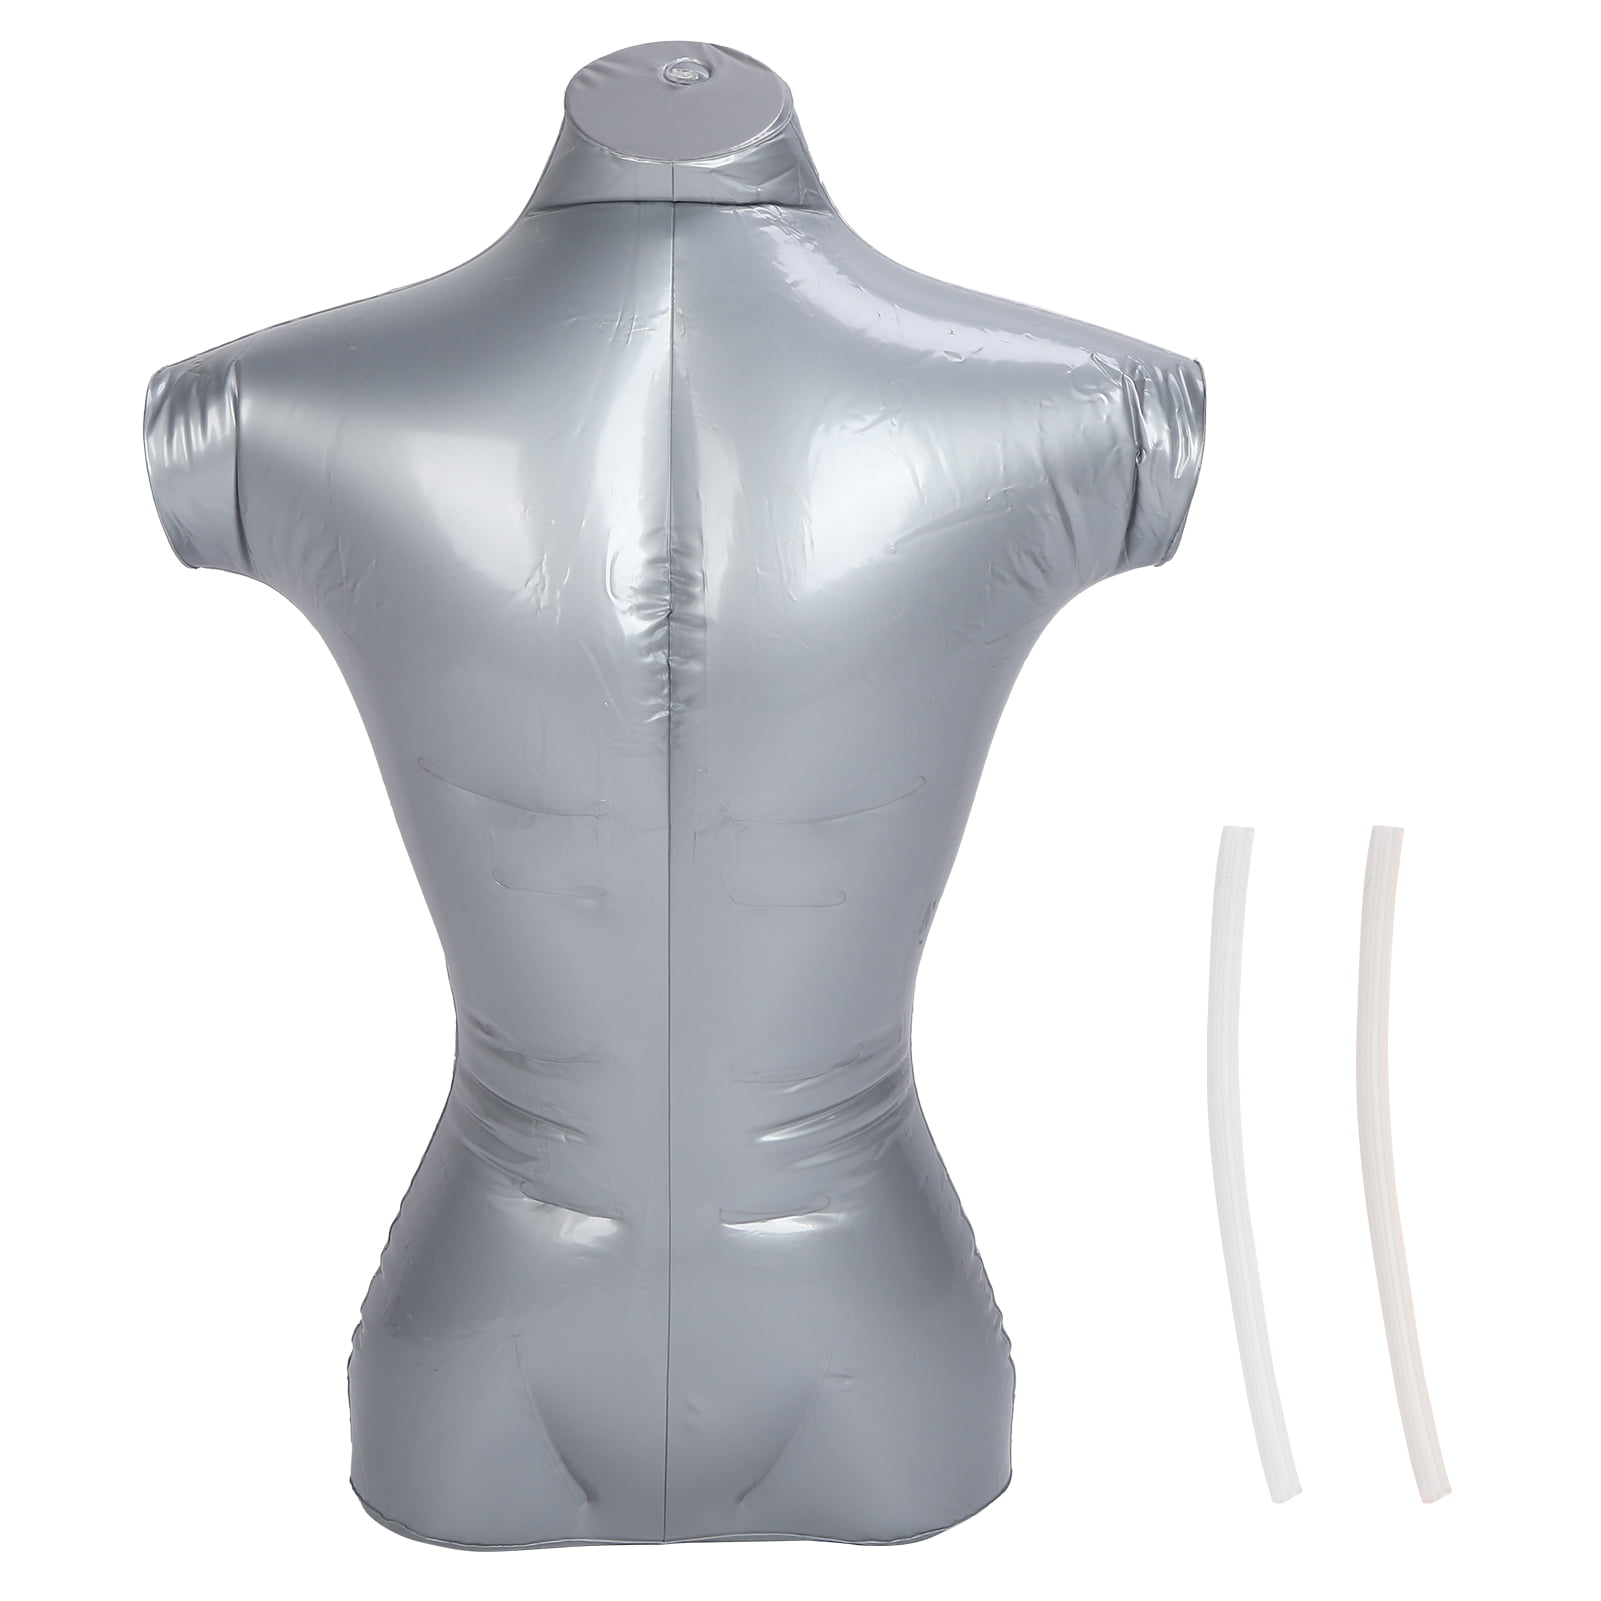 1x Man Full Body Inflatable Mannequin Male Dummy Clothes Model Display Accessory 